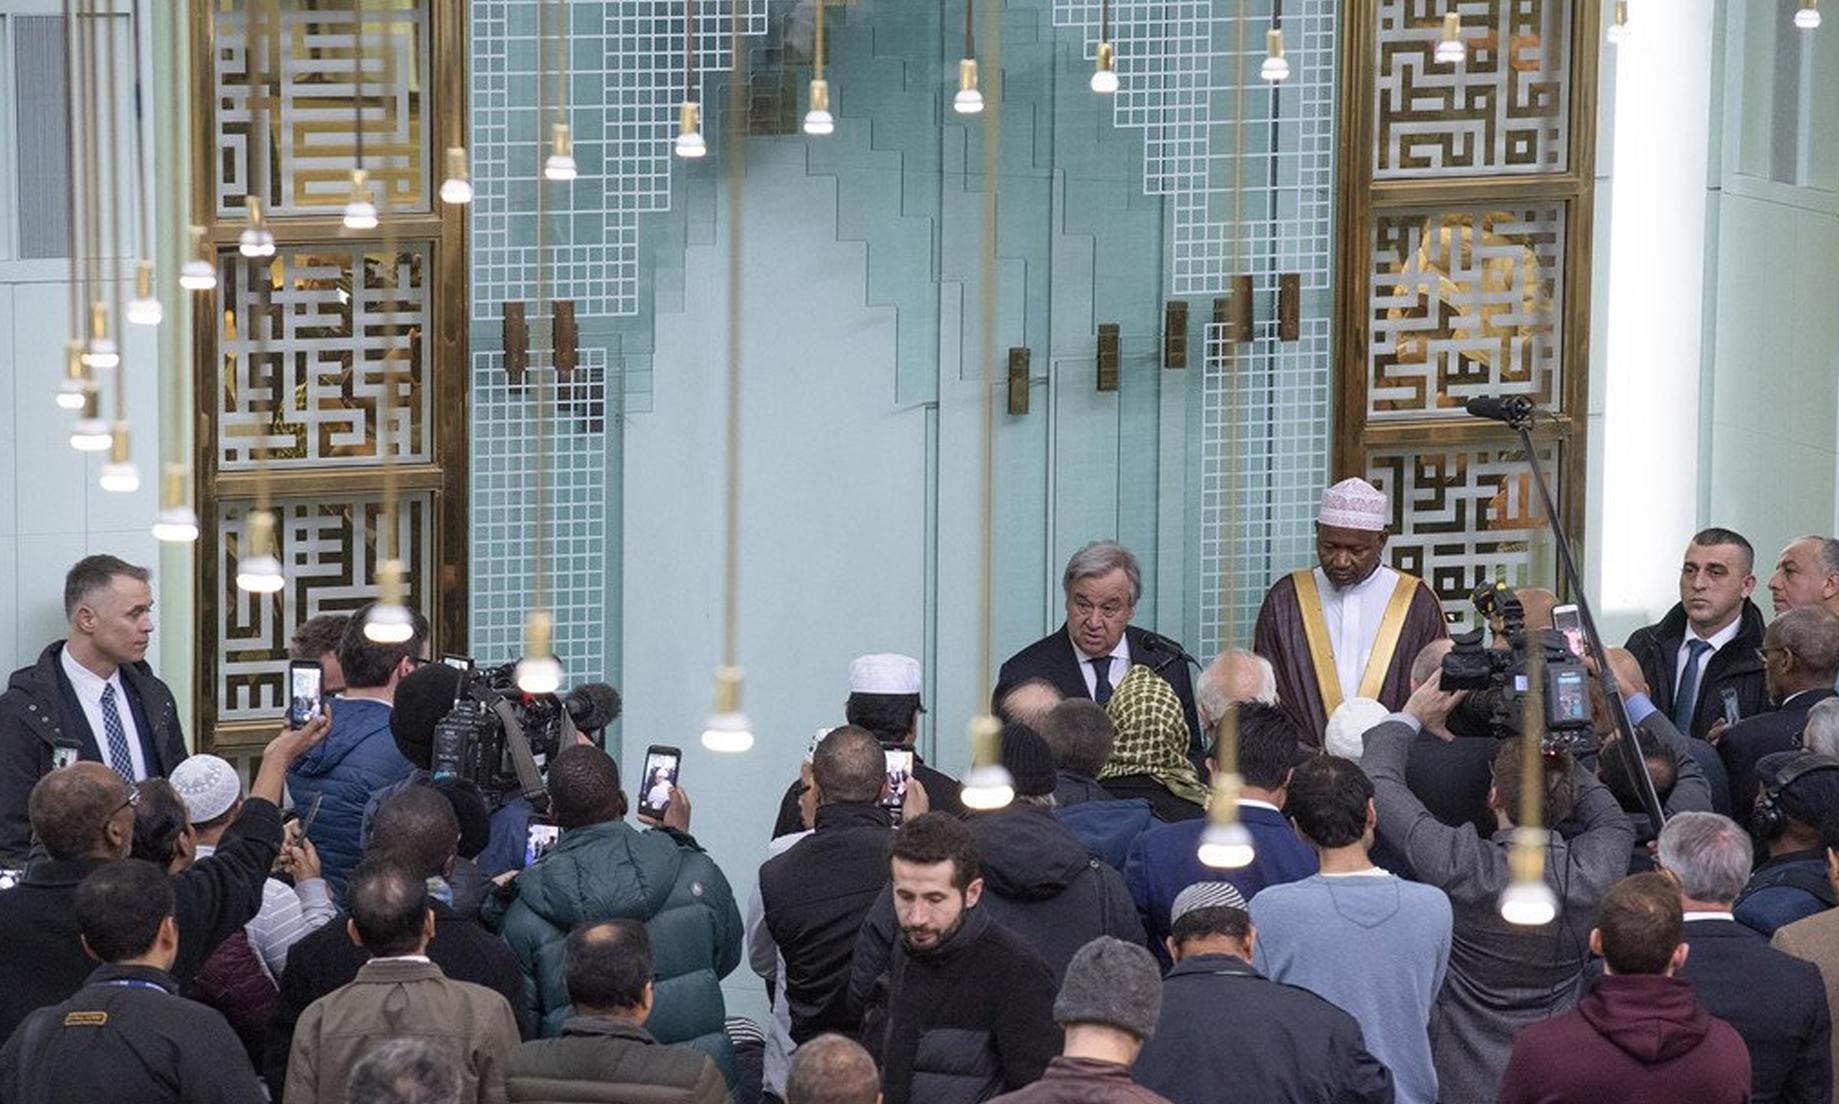 At New York mosque, UN chief pledges to help protect religious sites